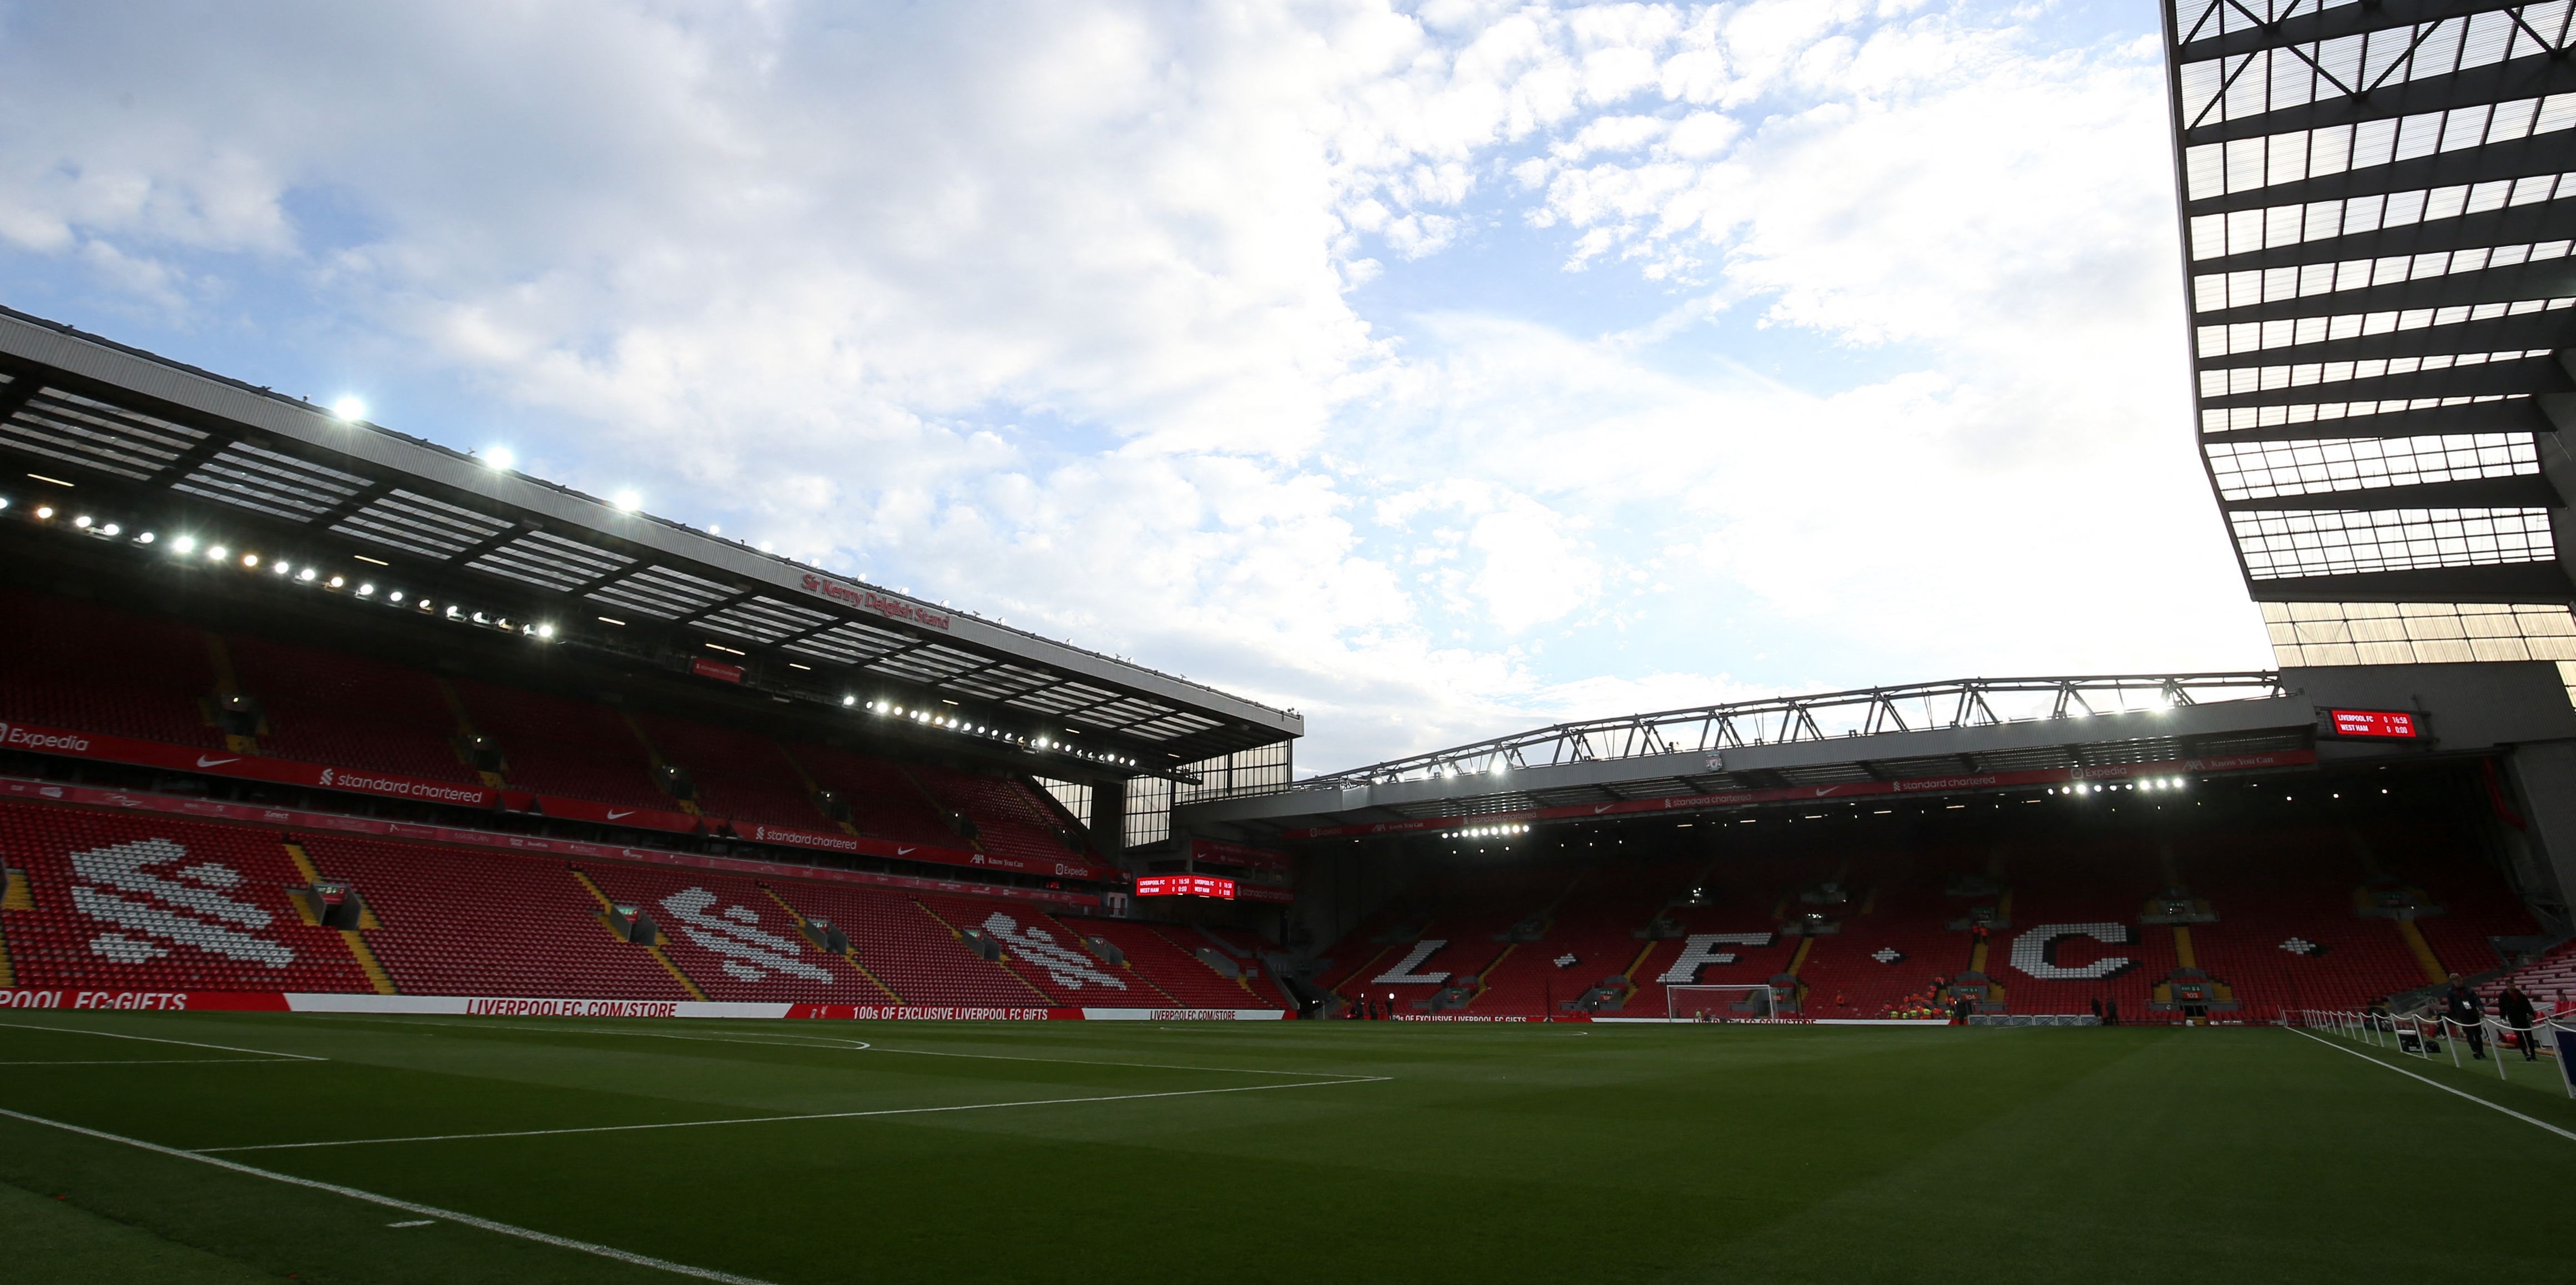 FSG reportedly considering Anfield plans which might surprise Liverpool fans for one reason